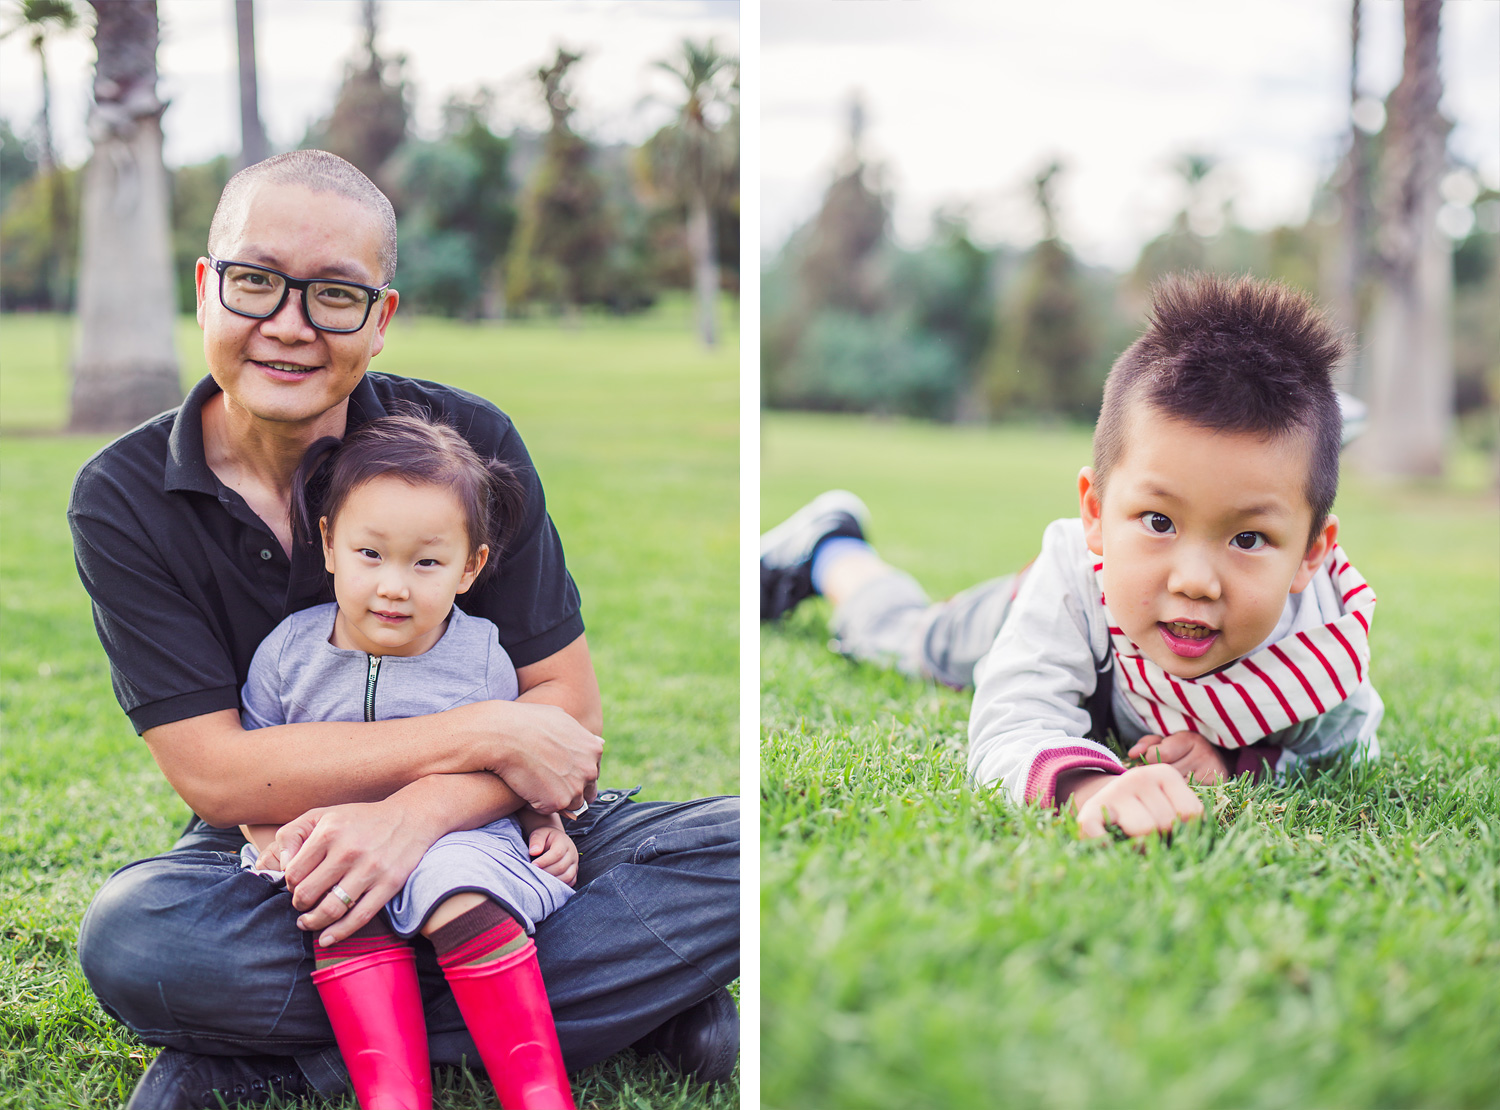 Lacy Park Family Portraits | Stephen Grant Photography